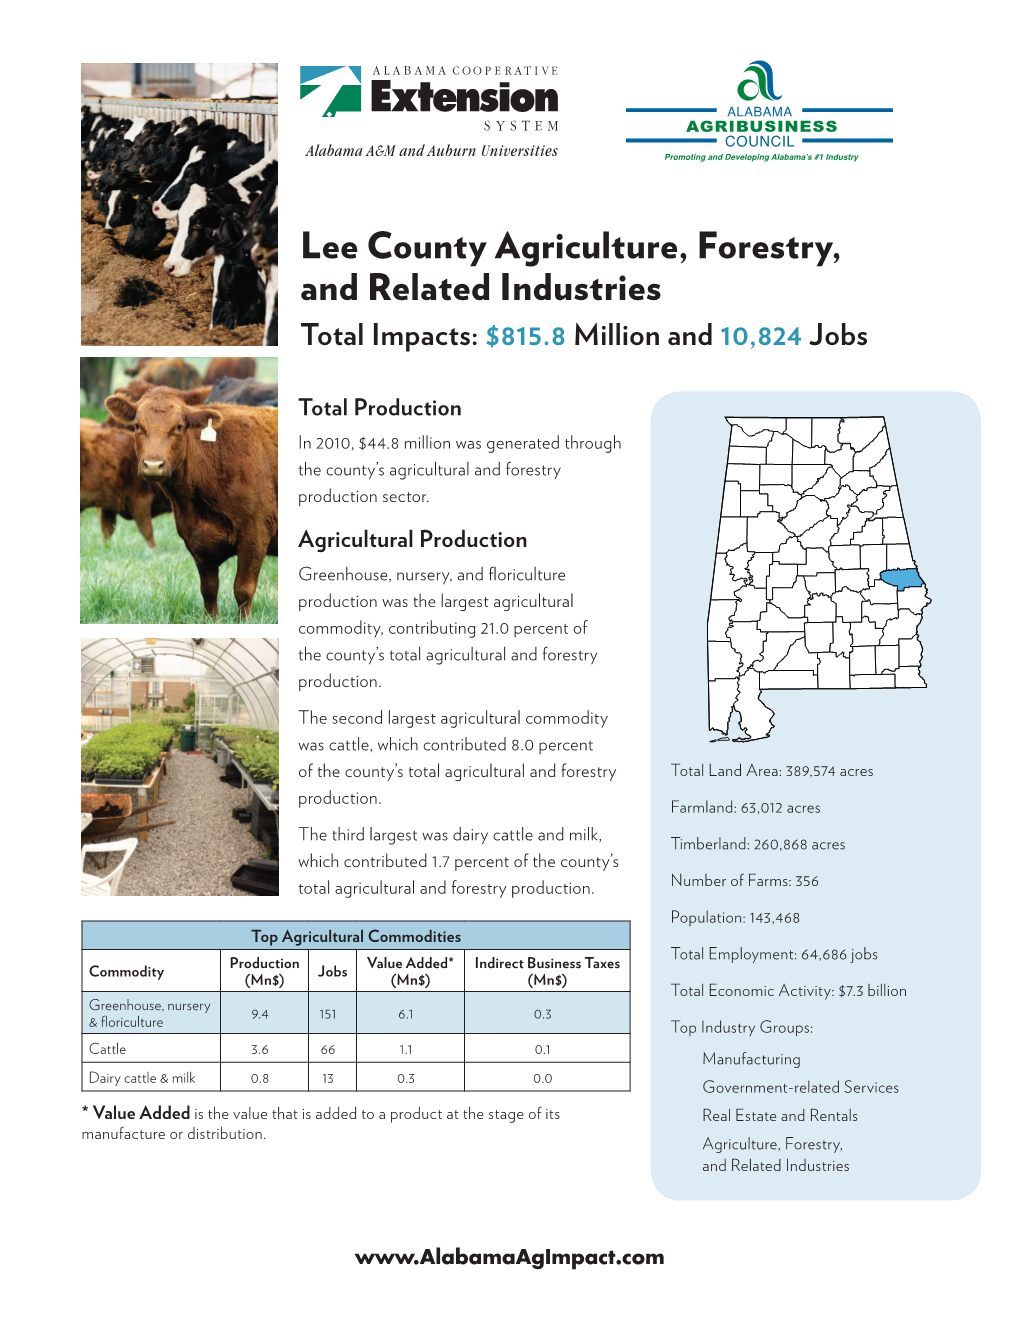 Lee County Agriculture, Forestry, and Related Industries Total Impacts: $815.8 Million and 10,824 Jobs